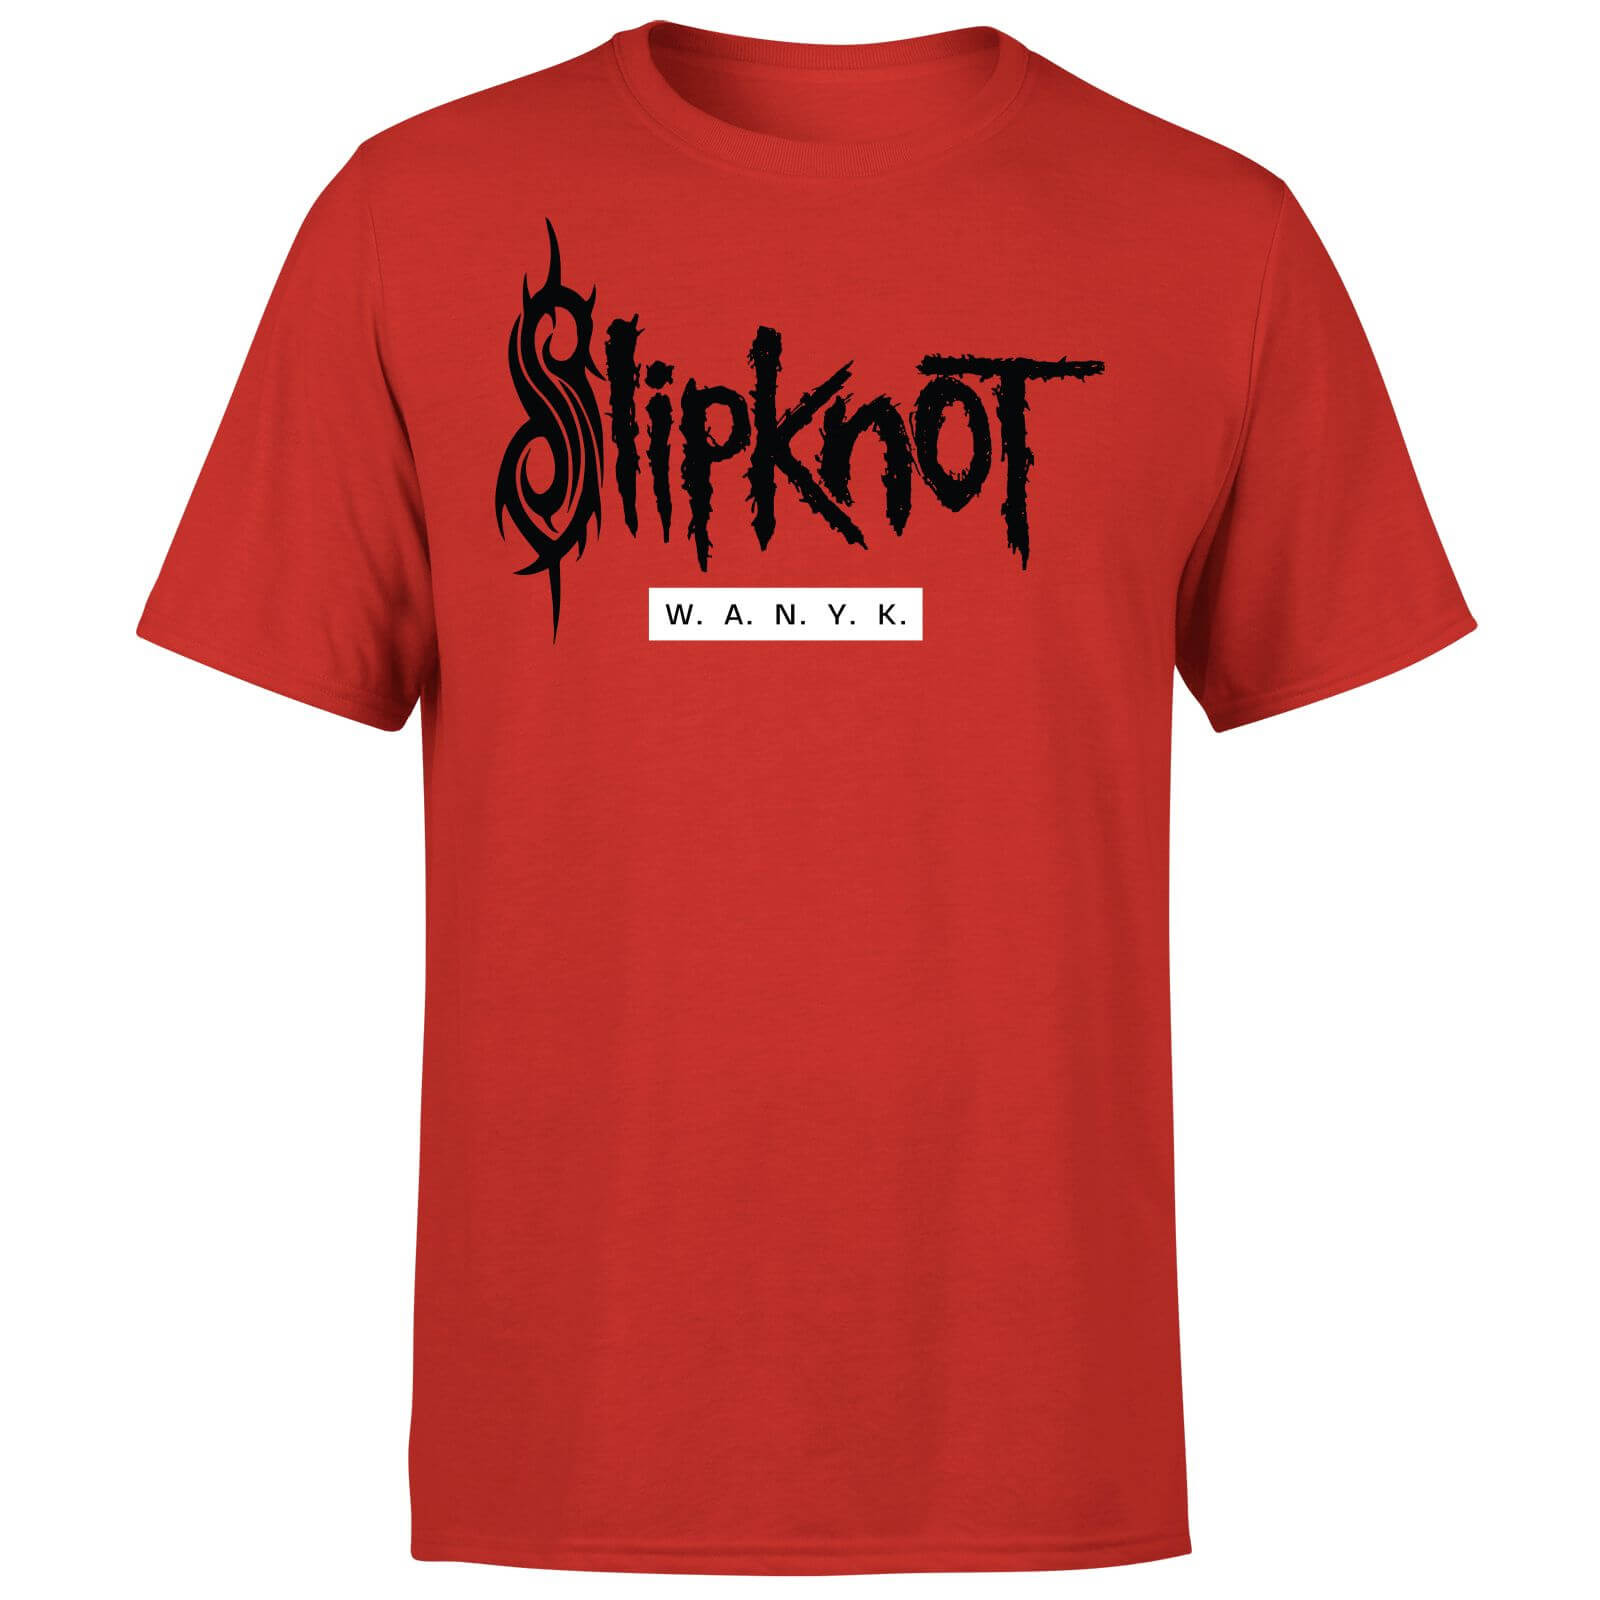 Slipknot W.A.N.Y.K T-Shirt - Red - M - Red